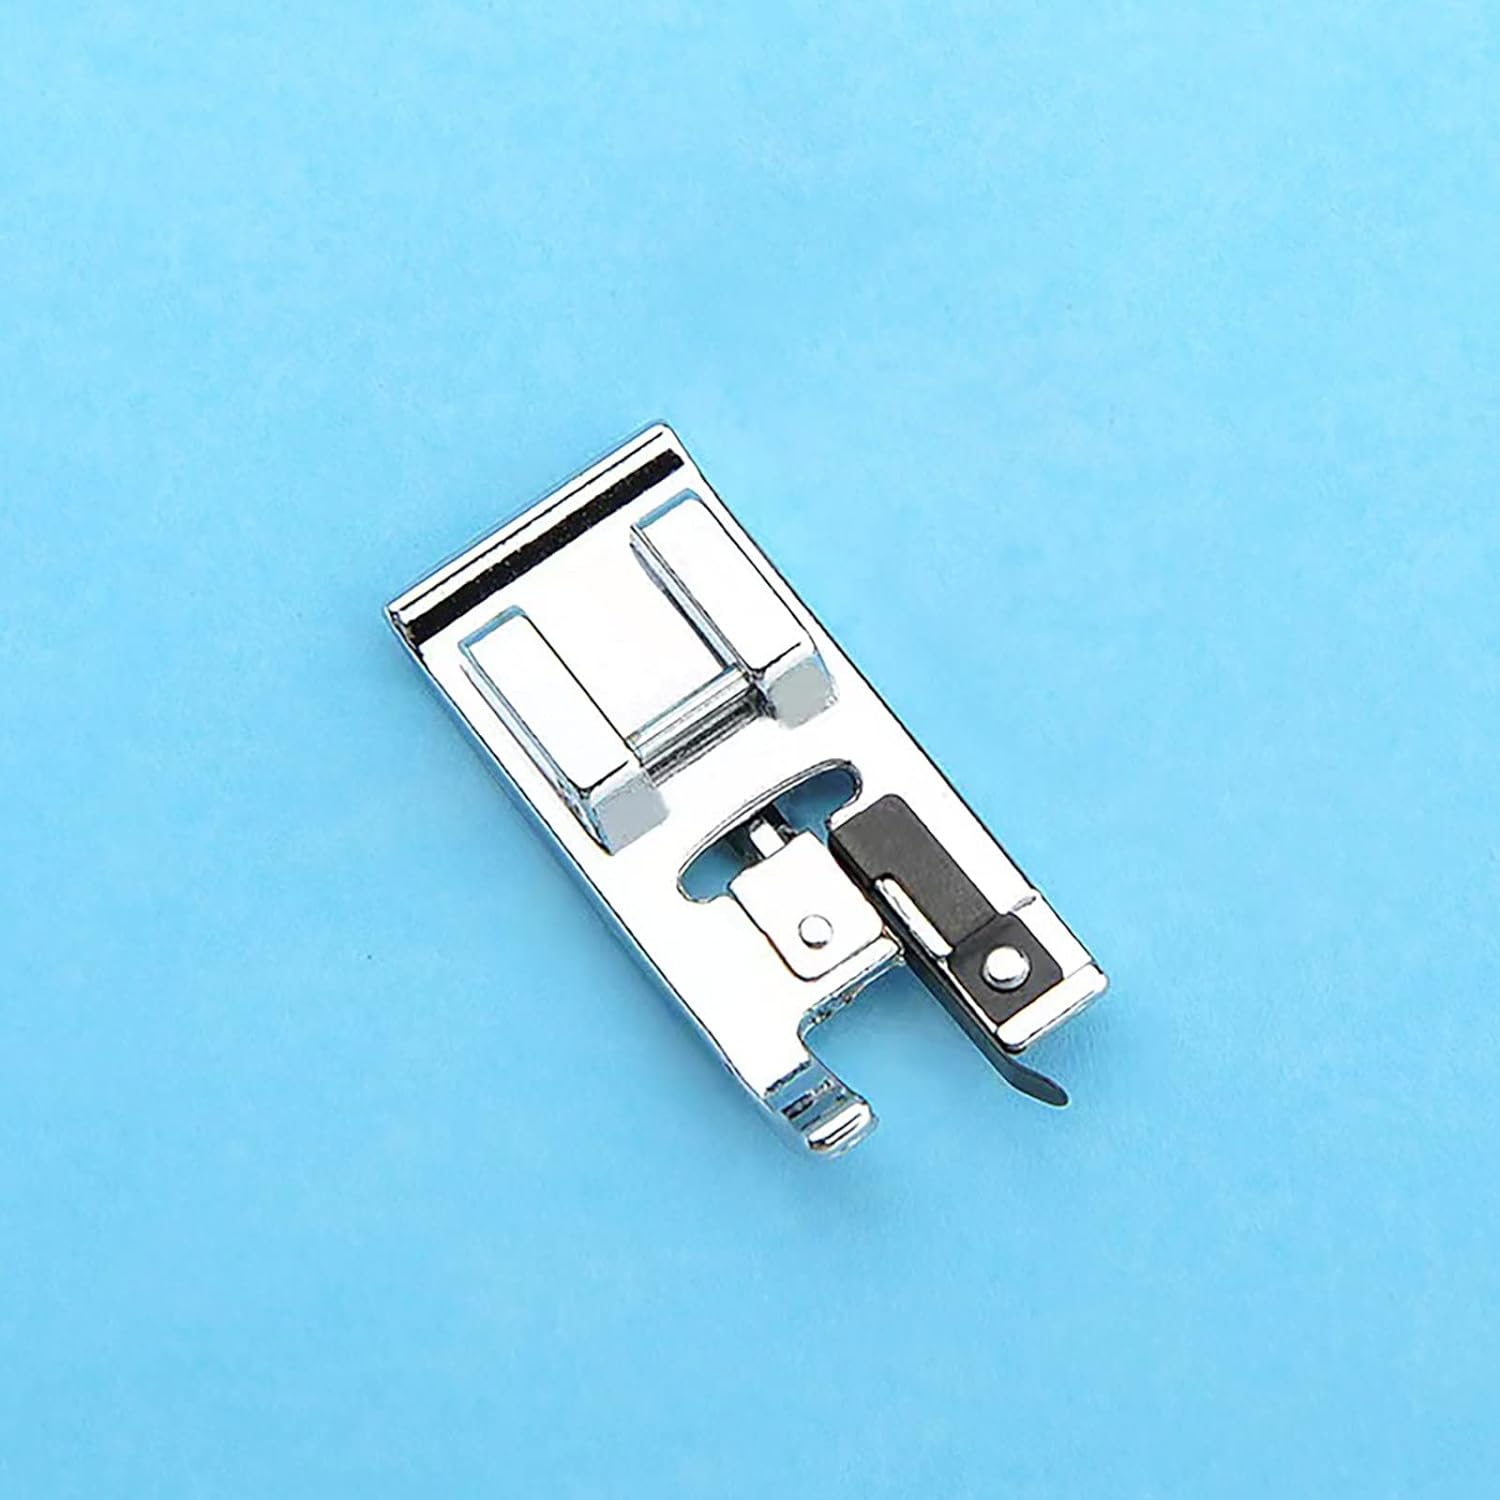 Great Choice Products Overlock Overcast Presser Foot Fits For All Low Shank Snap-On Singer, Brother, Babylock, Janome, Kenmore, White, Juki, New Ho…